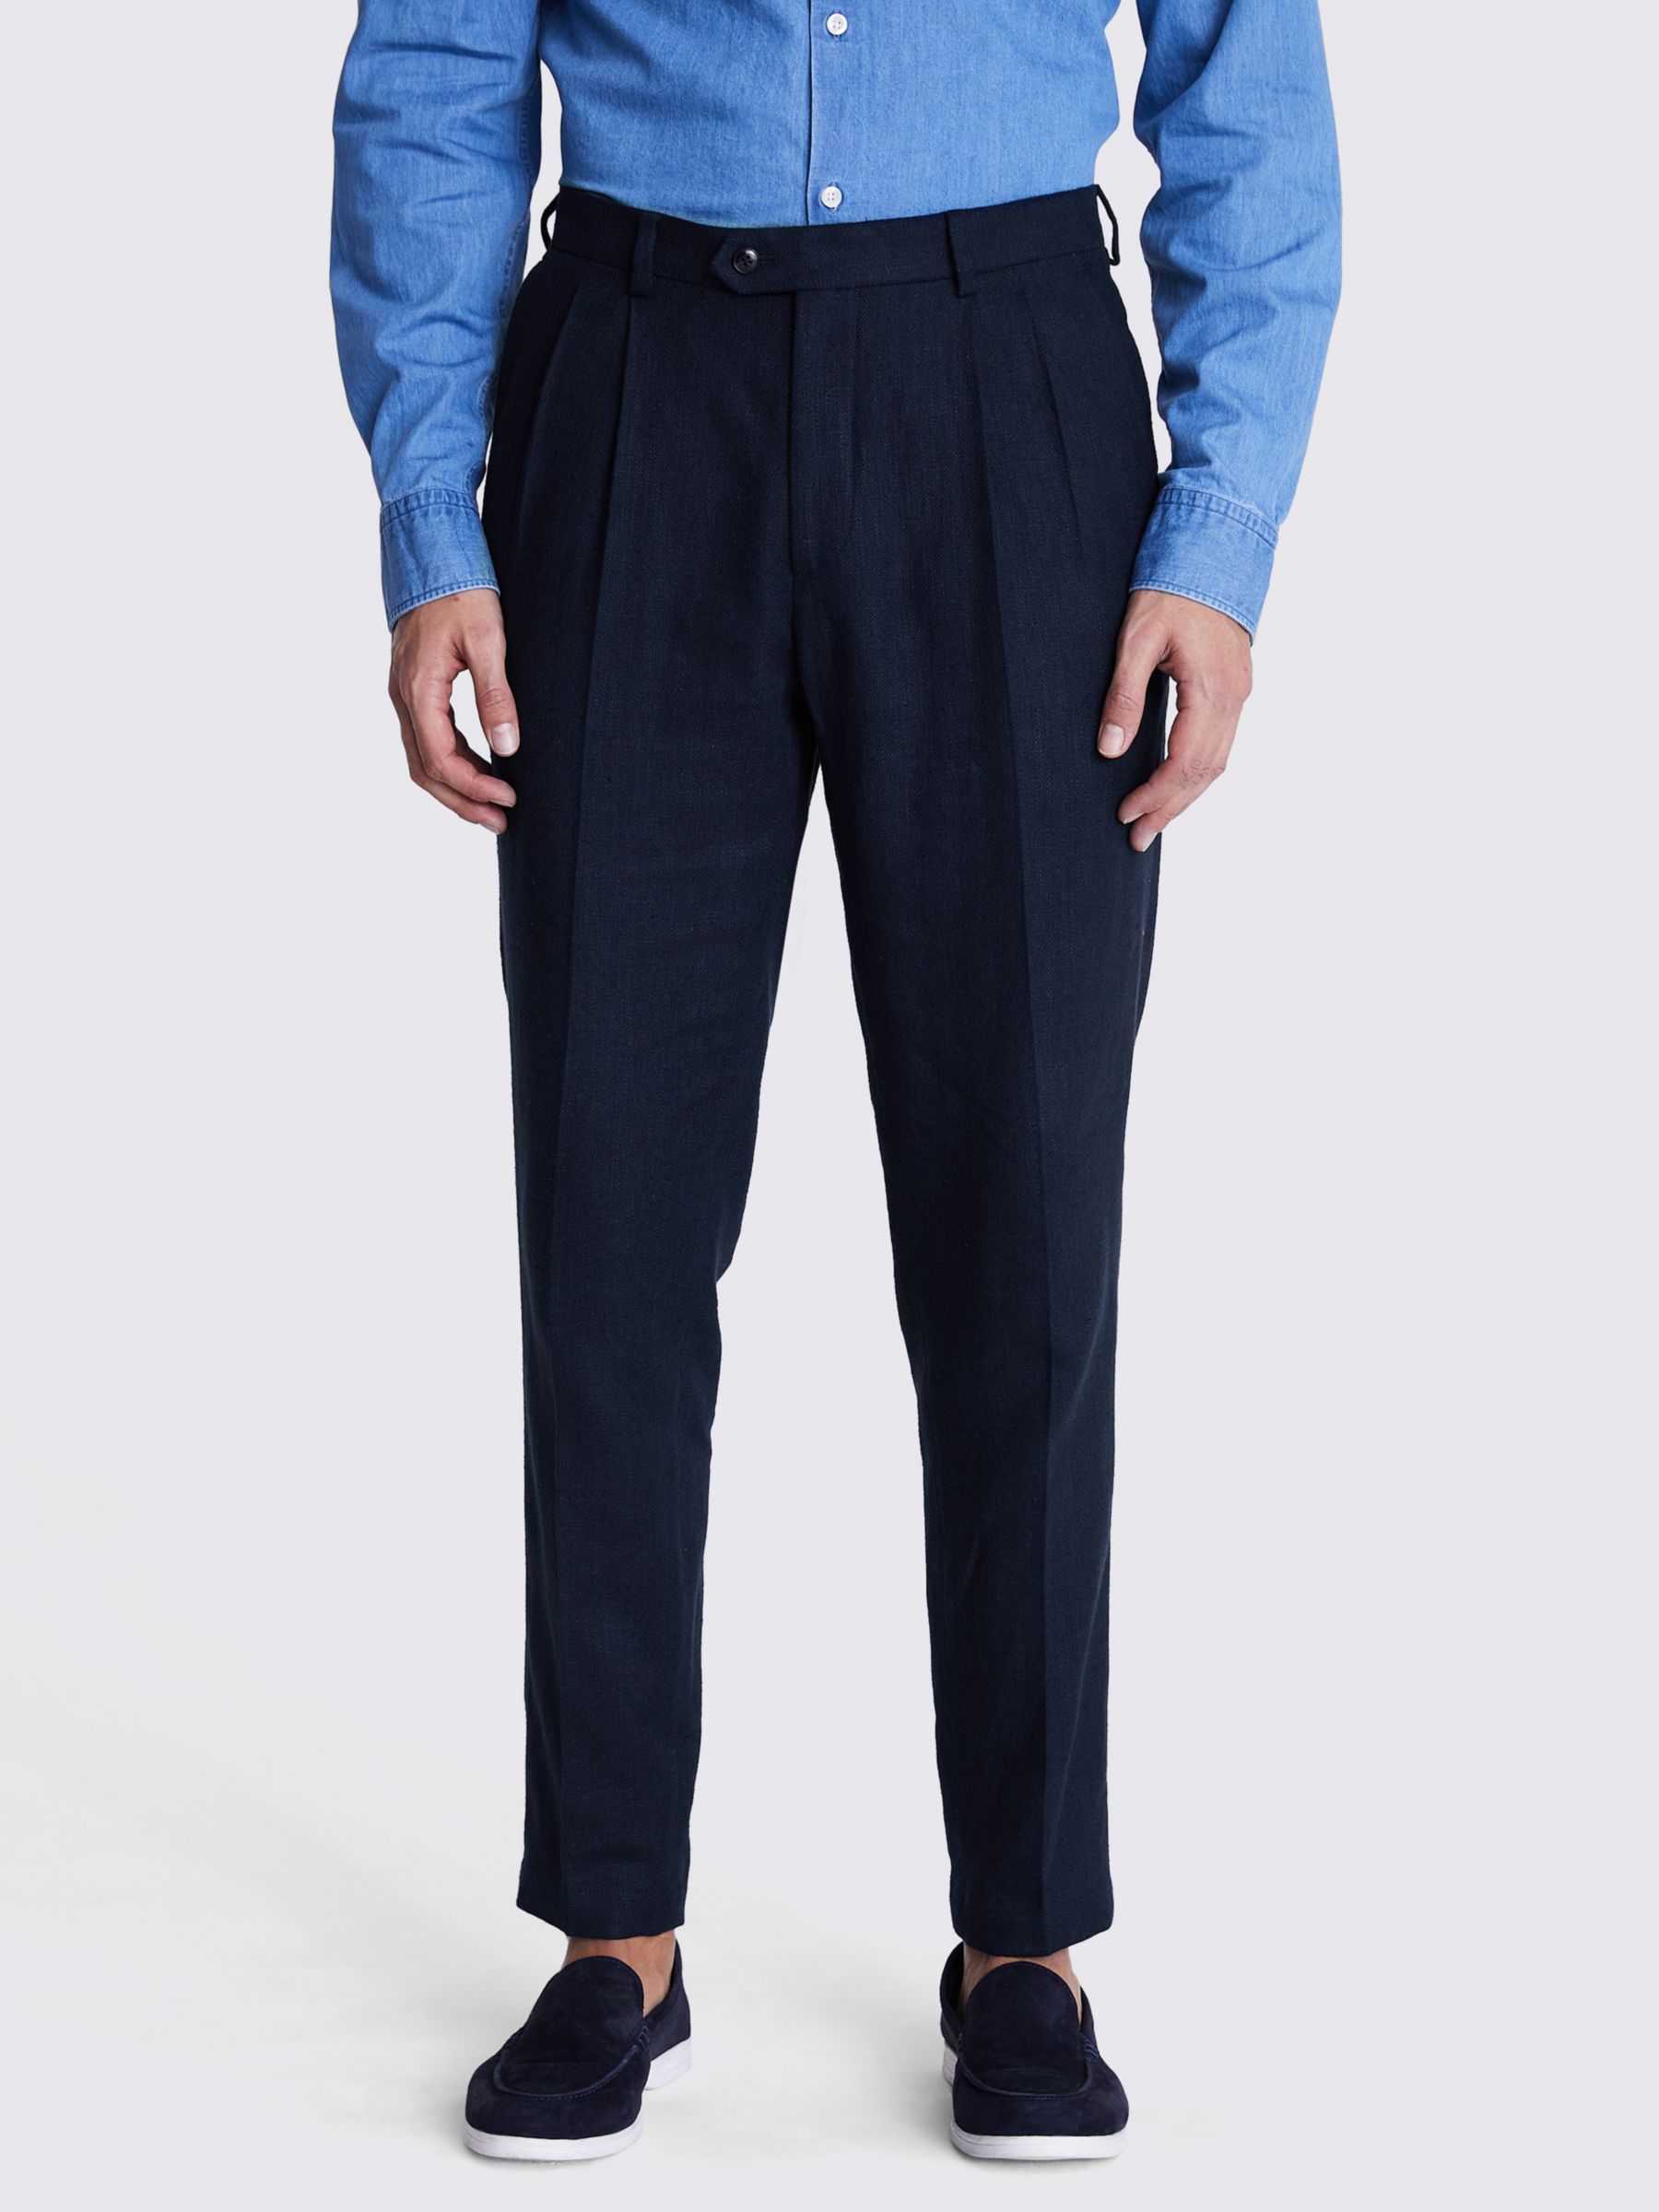 Buy Moss Tailored Fit Herringbone Trousers, Navy Online at johnlewis.com